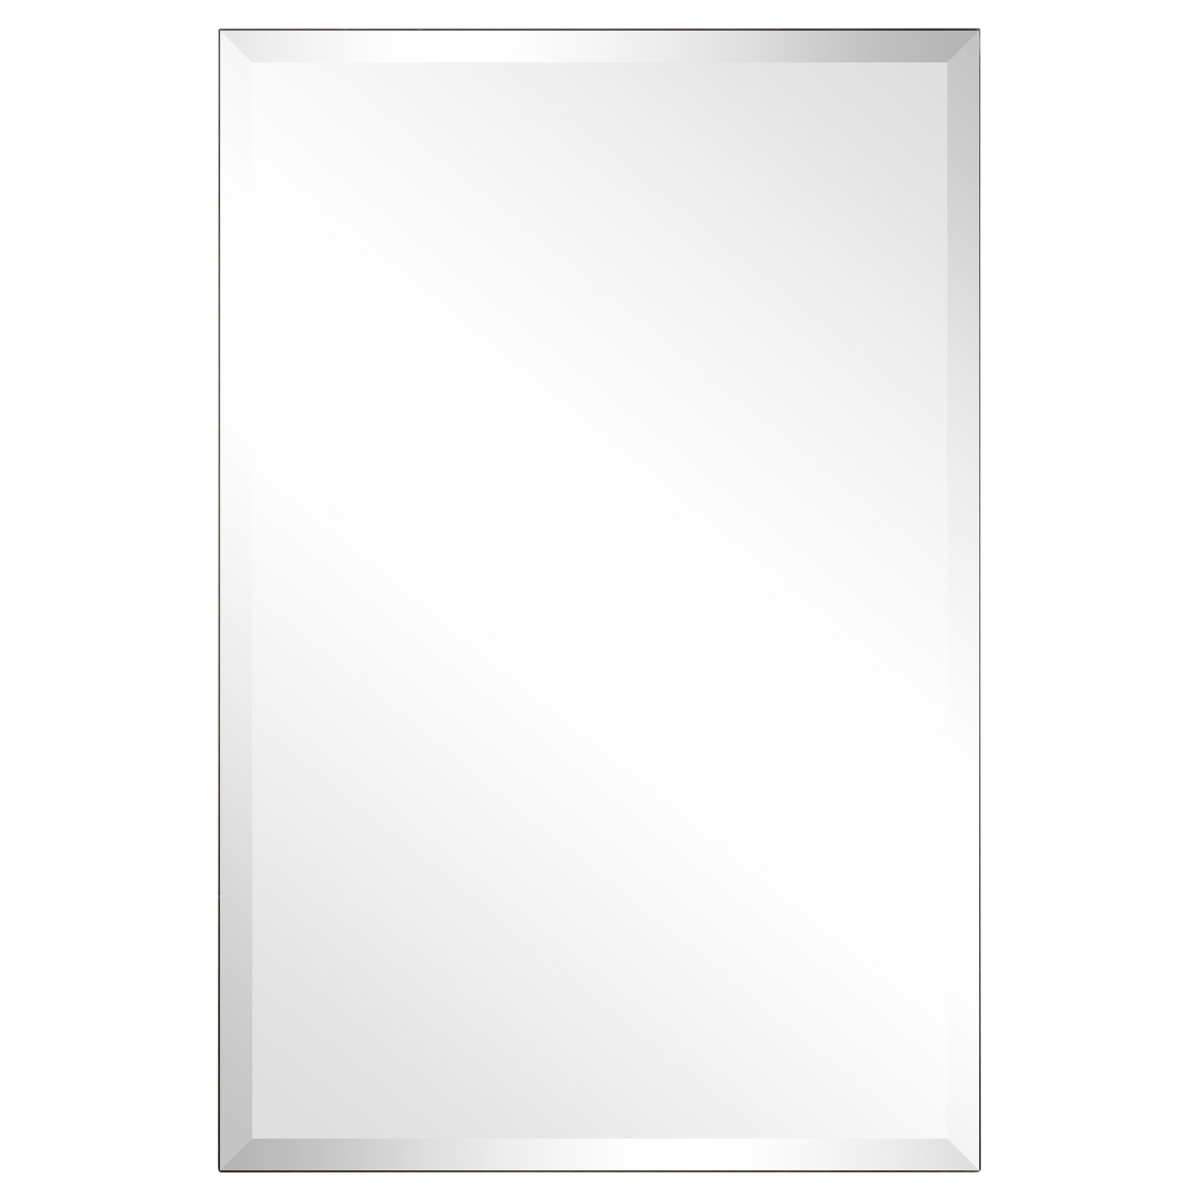 Flm-10010-2436 24 X 36 In. Frameless Wall Mirror With Beveled Prism Mirror Panels - 1 In. Beveled Edge